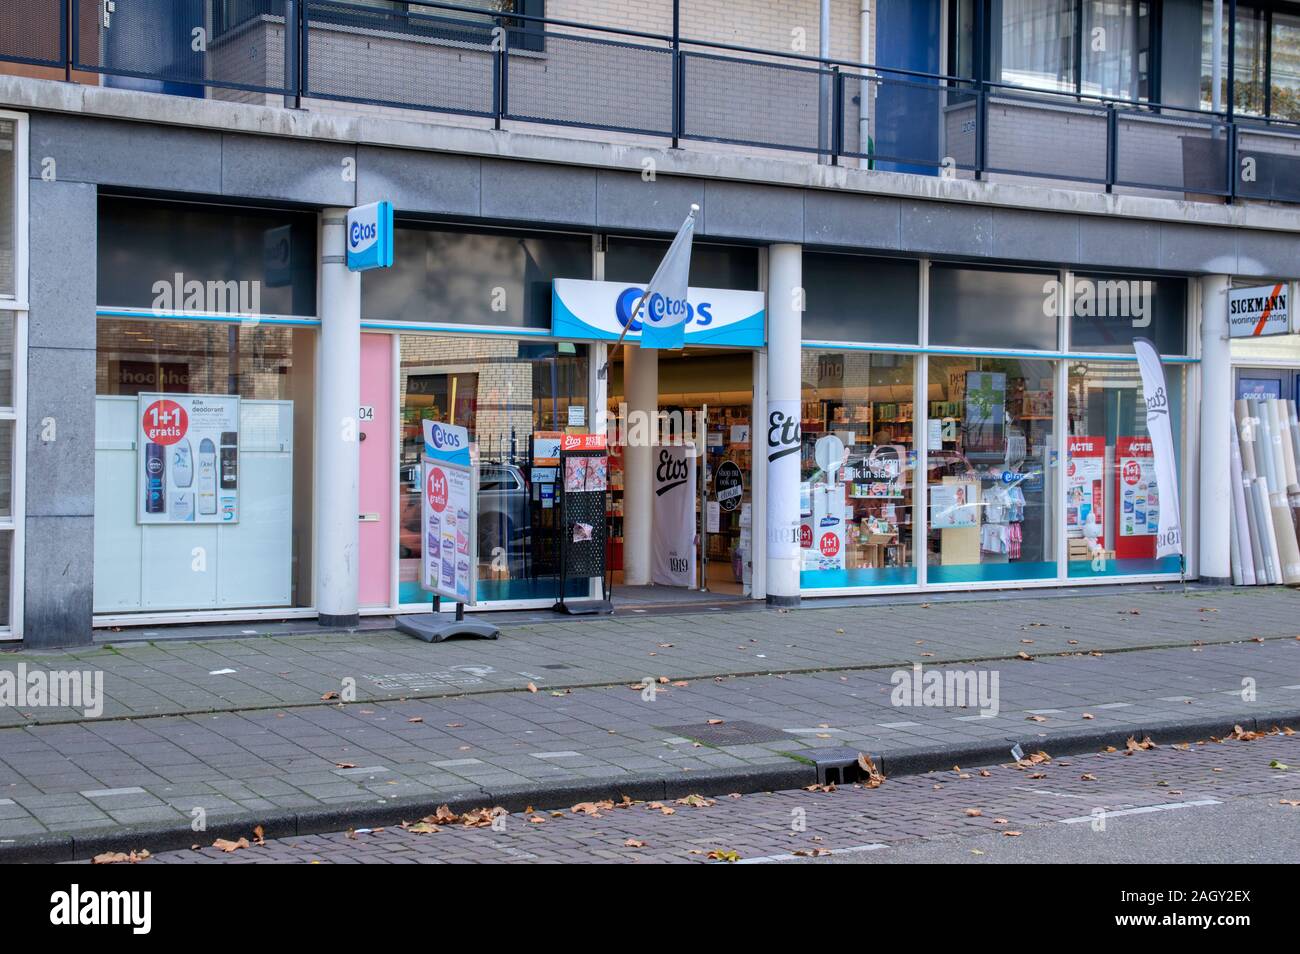 Etos Store At Amsterdam The Netherlands 2019 Stock Photo - Alamy